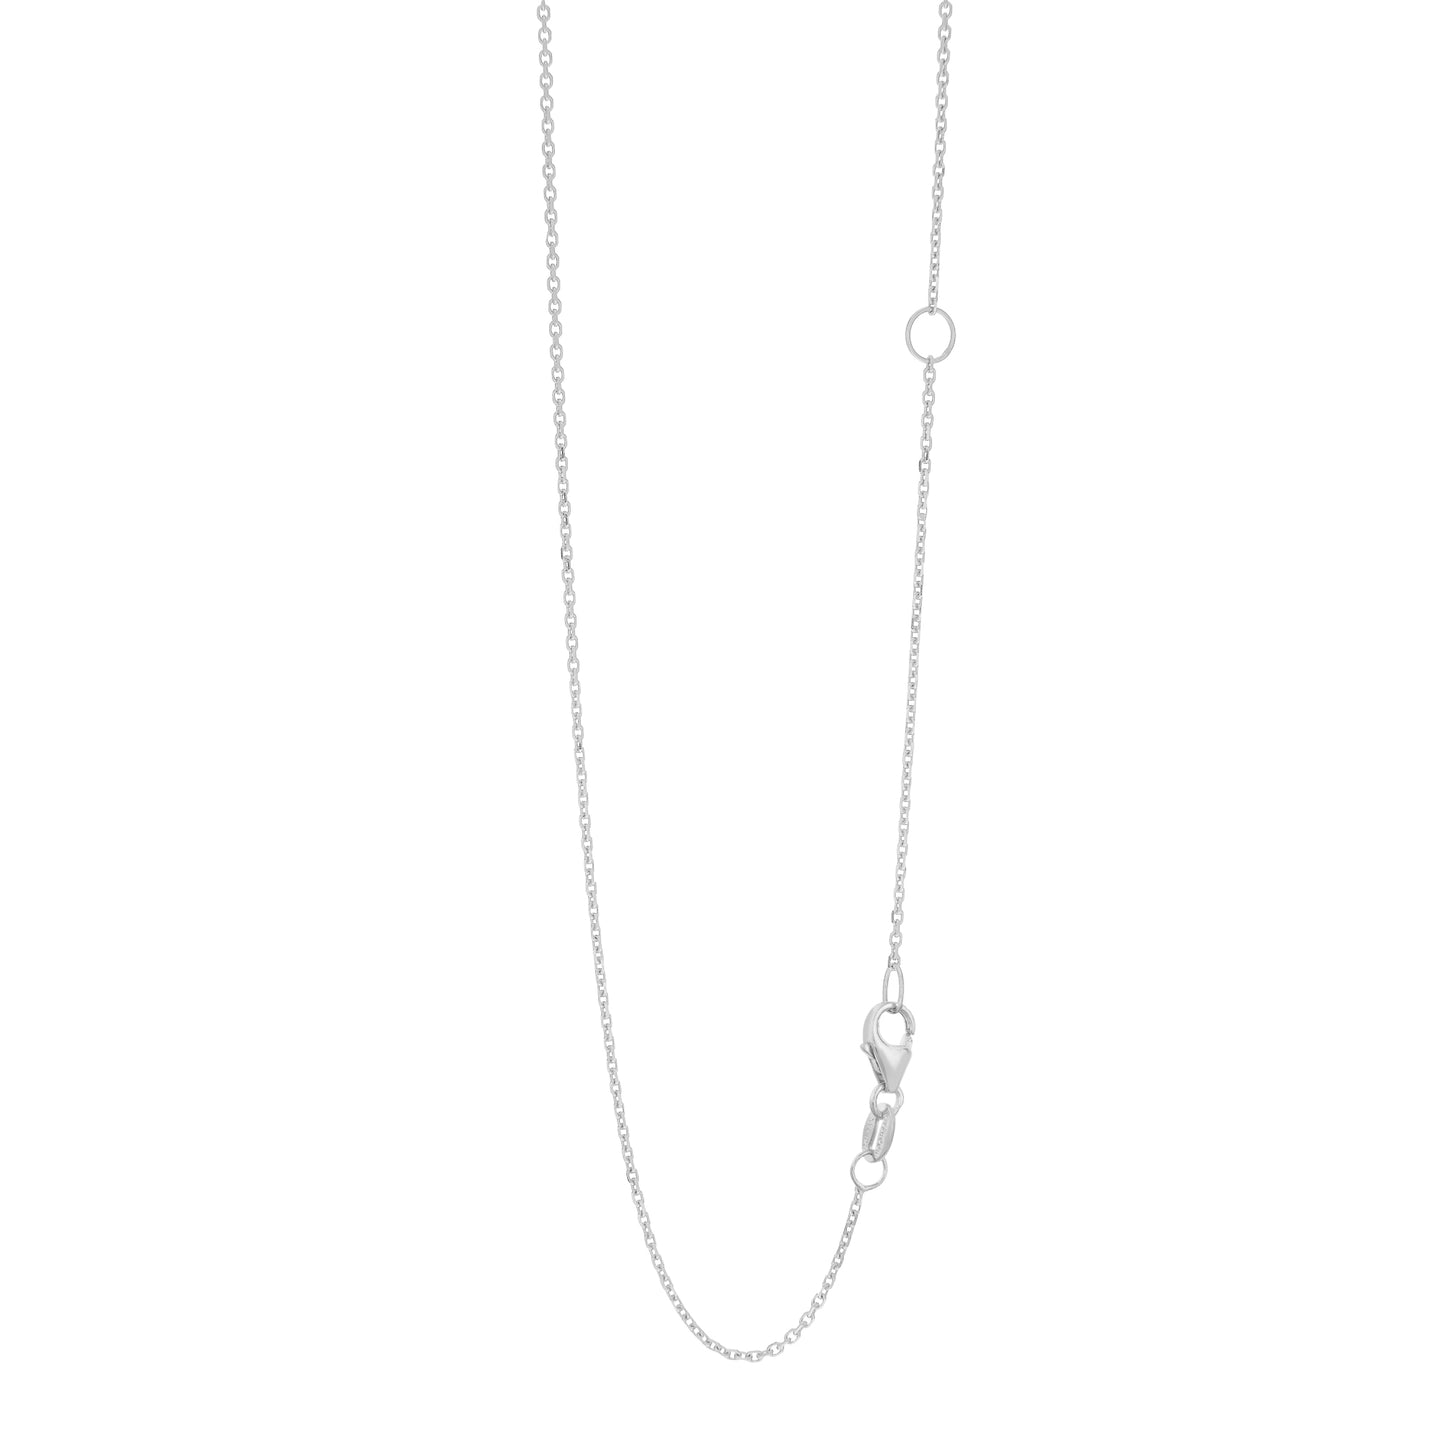 14K Gold 1.1mm Extendable Chain